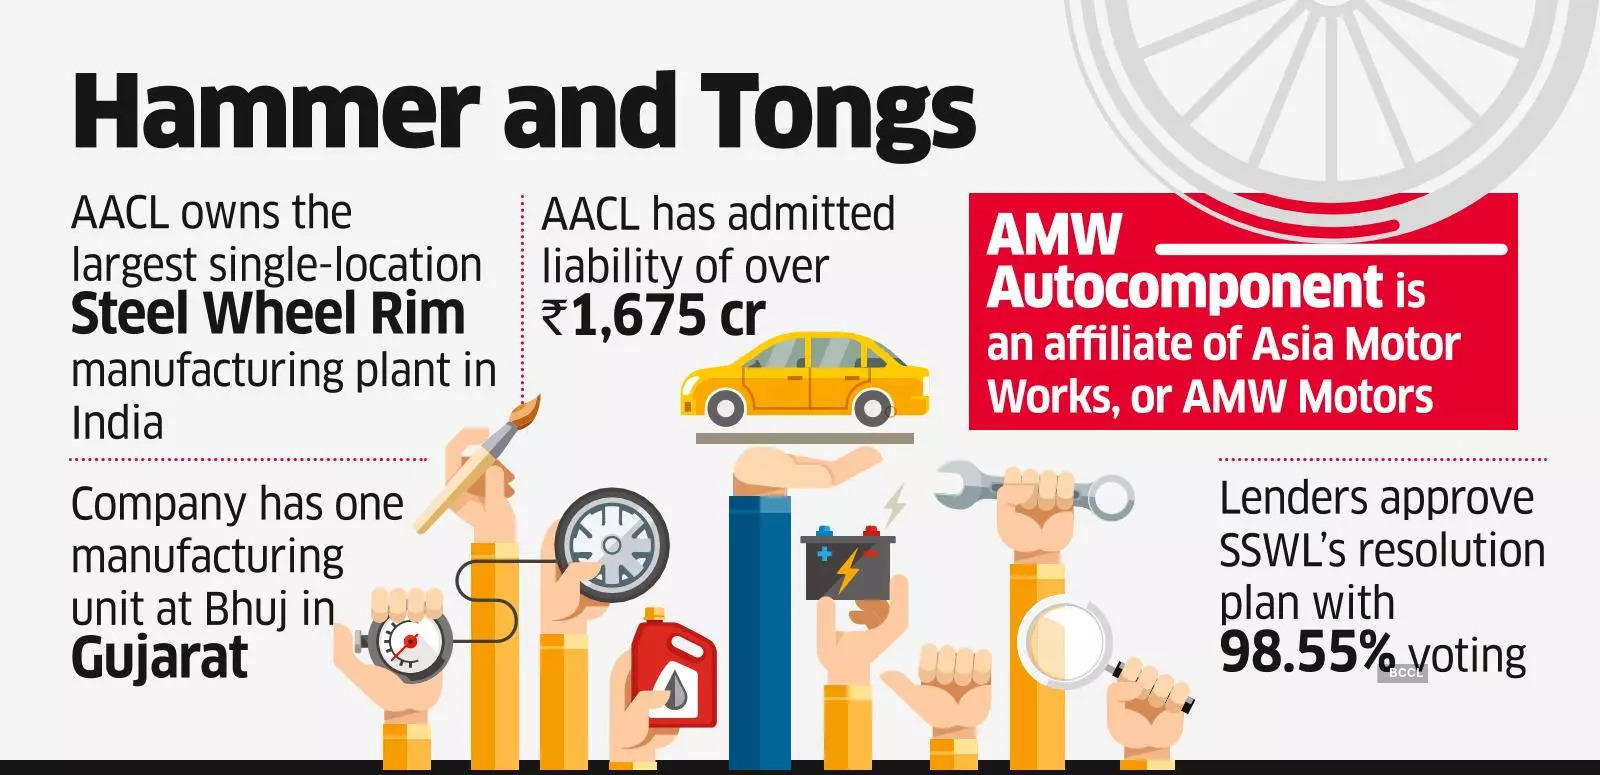 NCLT Okays Steel Strips Wheels’ Acquisition of AMW Autocomp